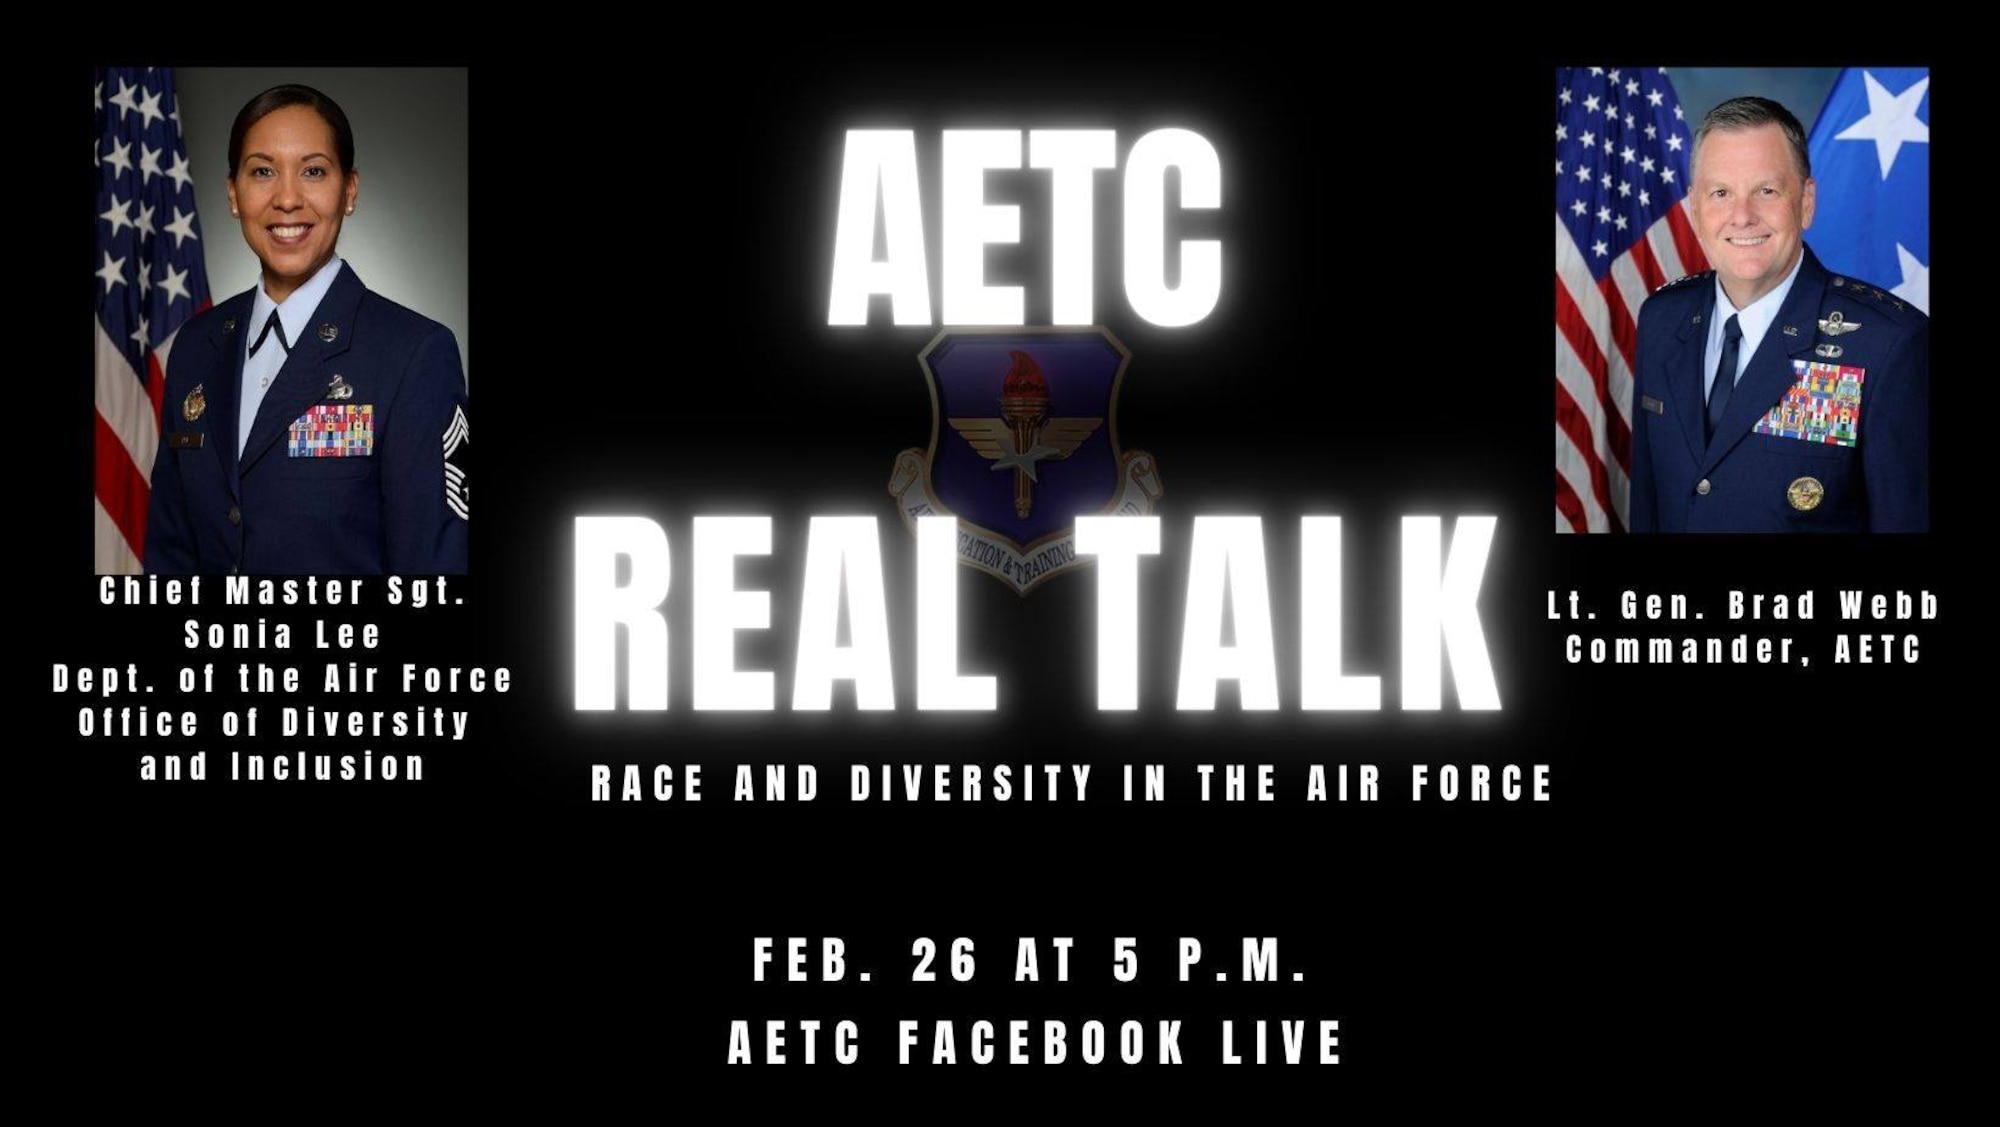 Graphic publicizing next AETC Real Talk on Feb. 26 at 5 p.m. central